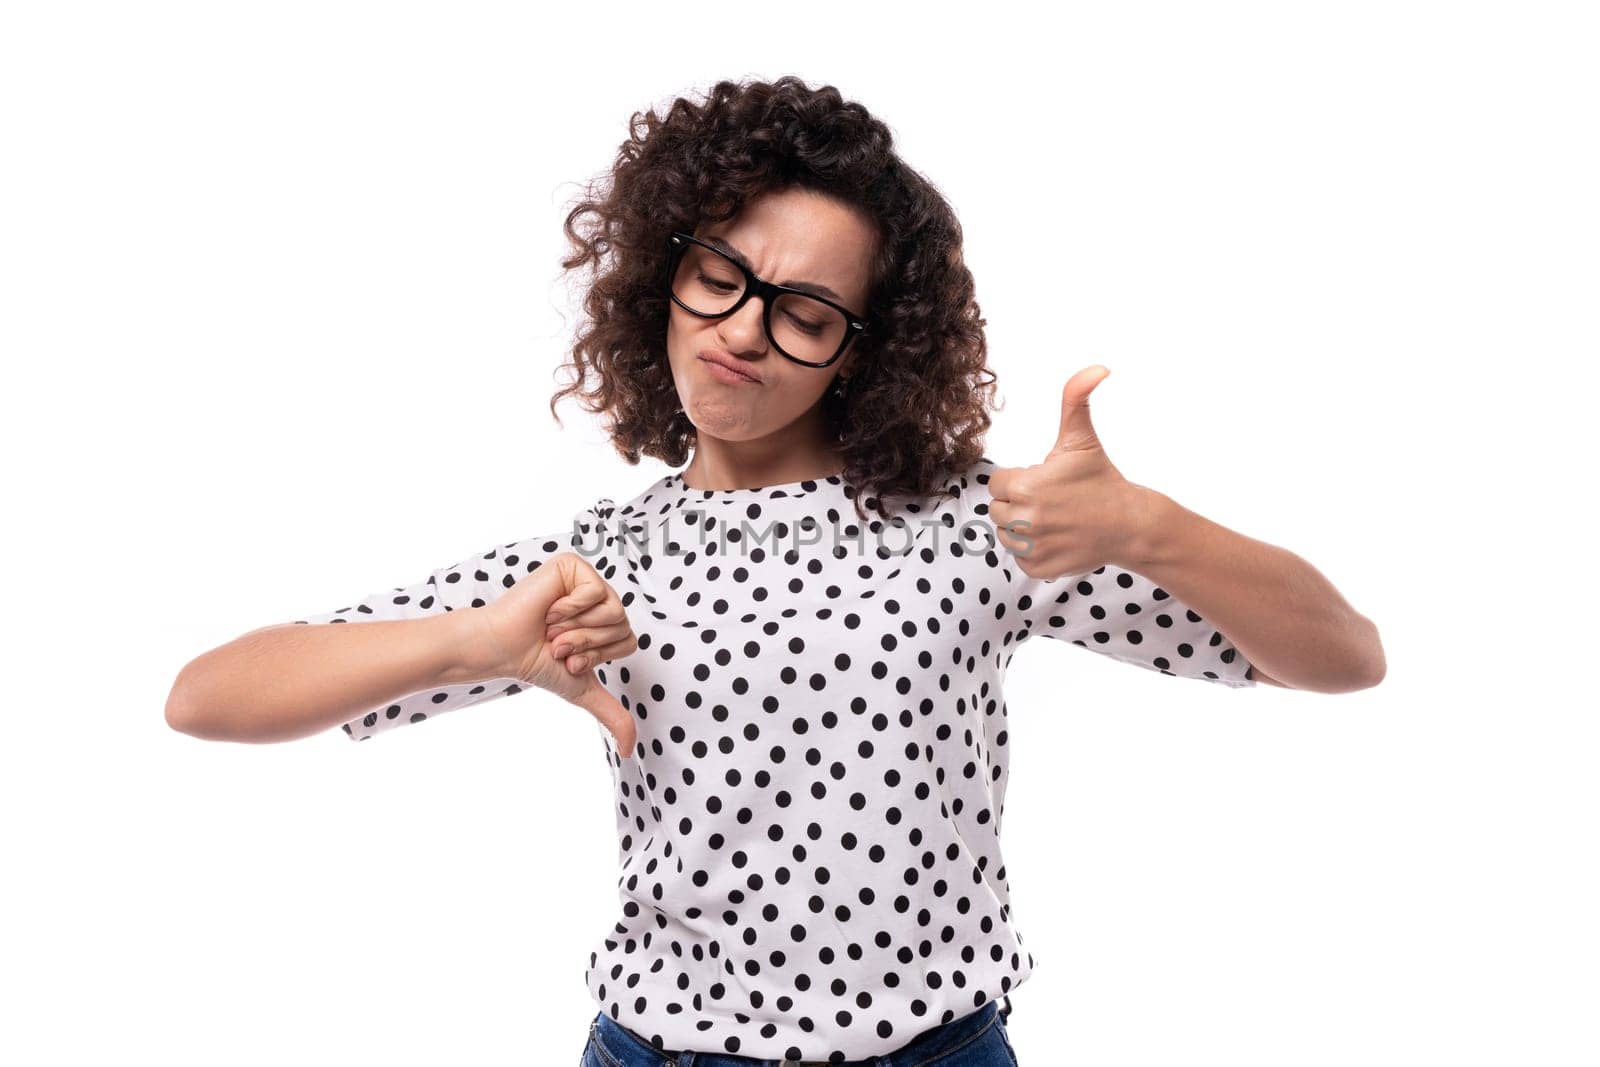 young authentic curly brunette slim lady wearing polka dot short sleeve shirt on white background.